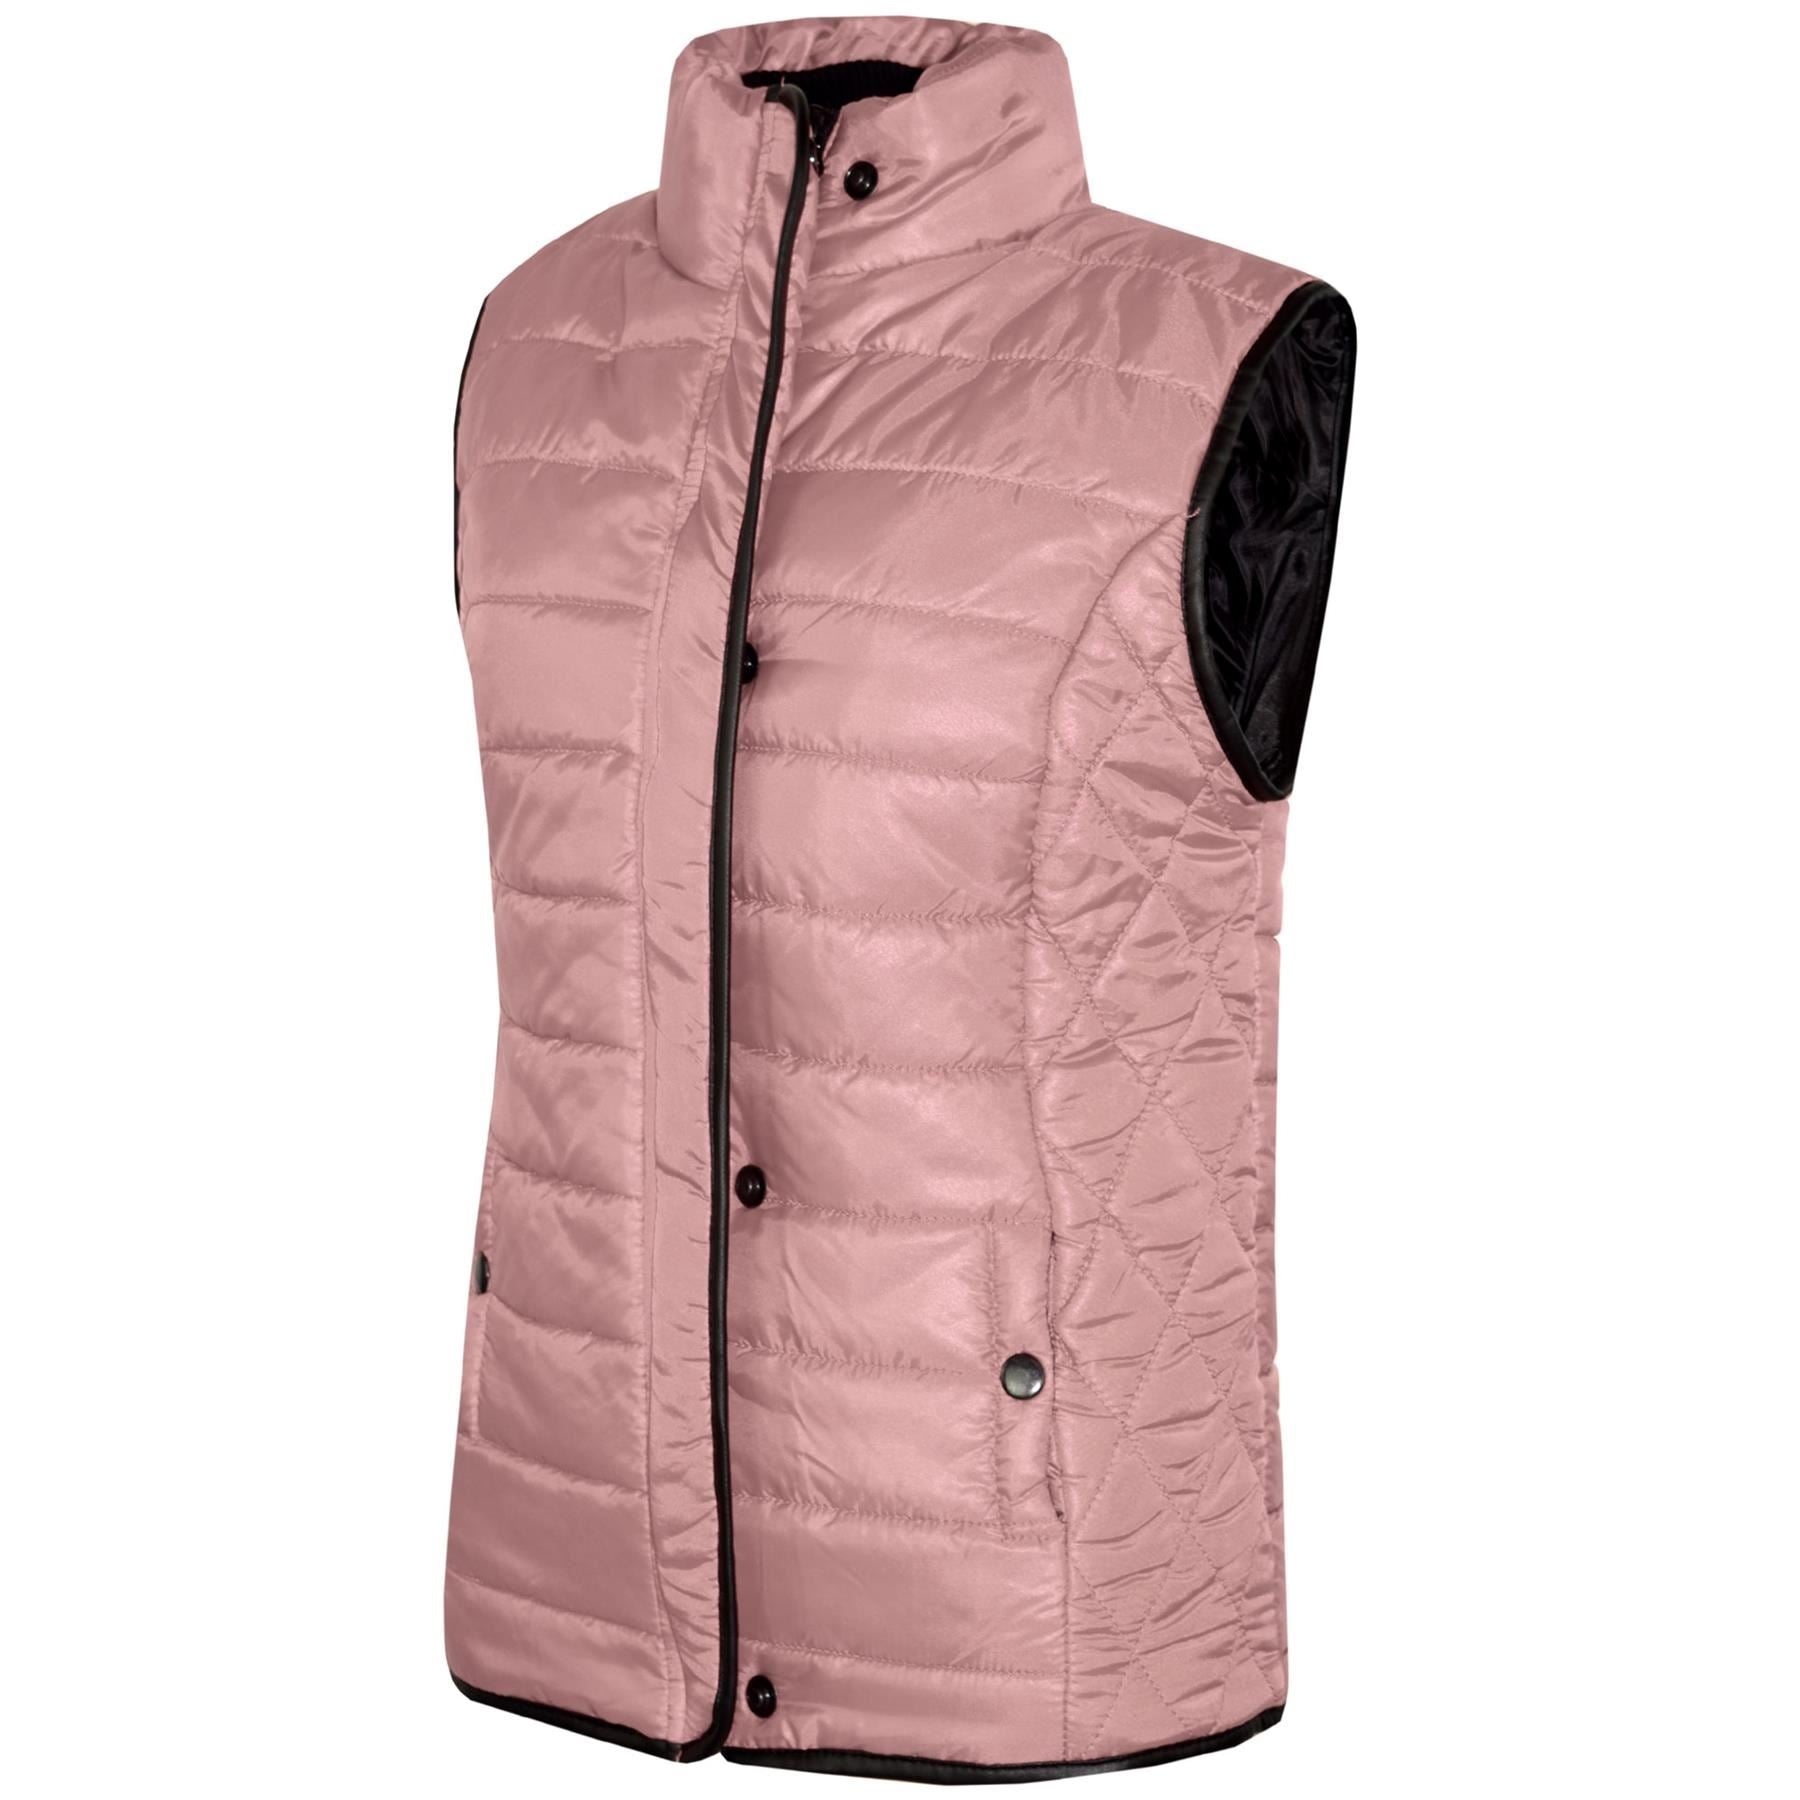 Kids Girls Puffer Quilted Baby Pink Sleeveless Wet Look Jacket